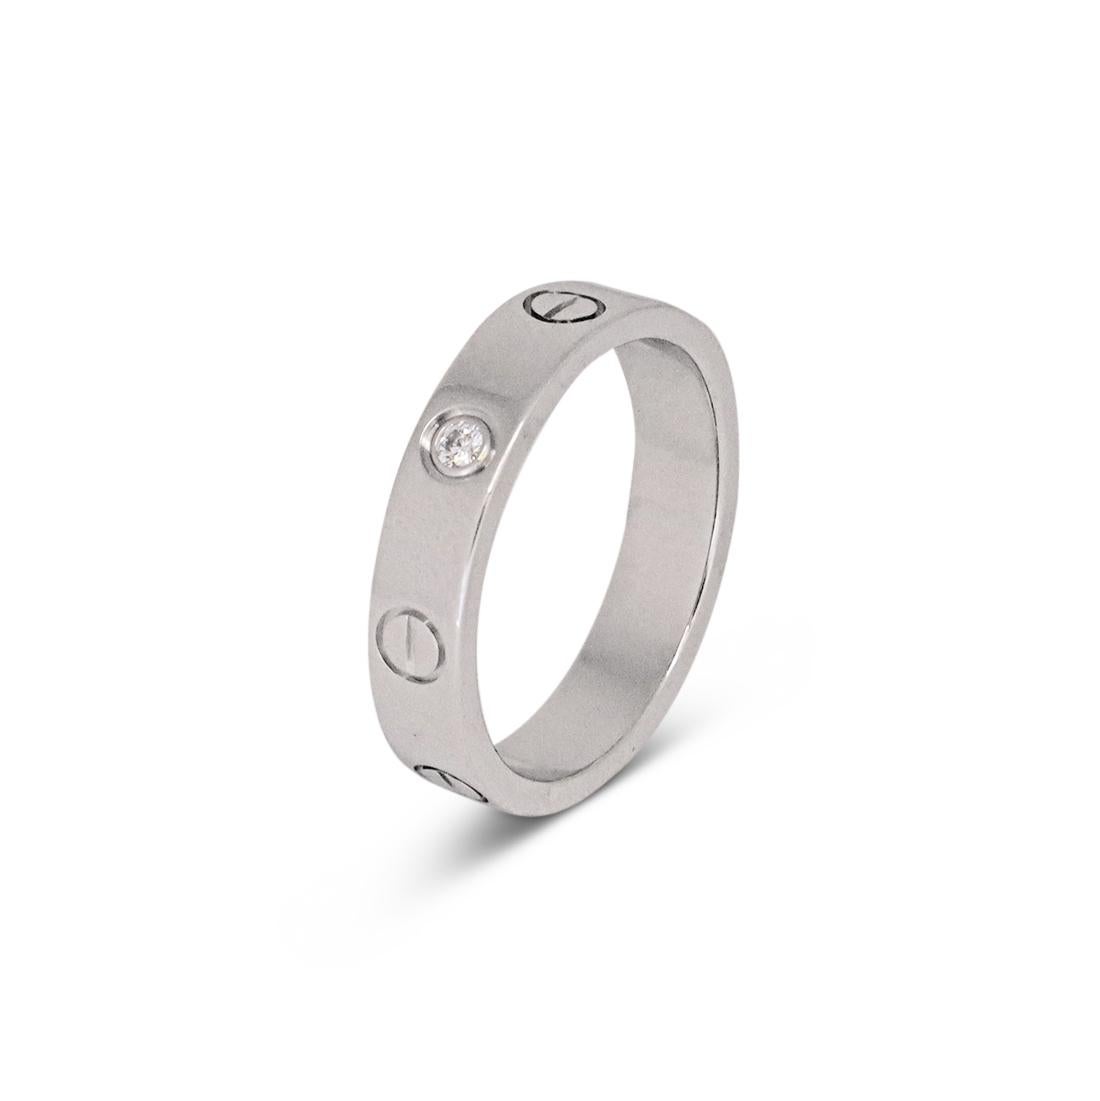 Authentic Cartier ‘Love’ wedding band crafted in 18 karat white gold and features one round brilliant diamond weighing an estimated 0.03 carat total weight. Signed Cartier, 51, Au750, with serial number and hallmarks. Size 51 (US 5 3/4). The ring is